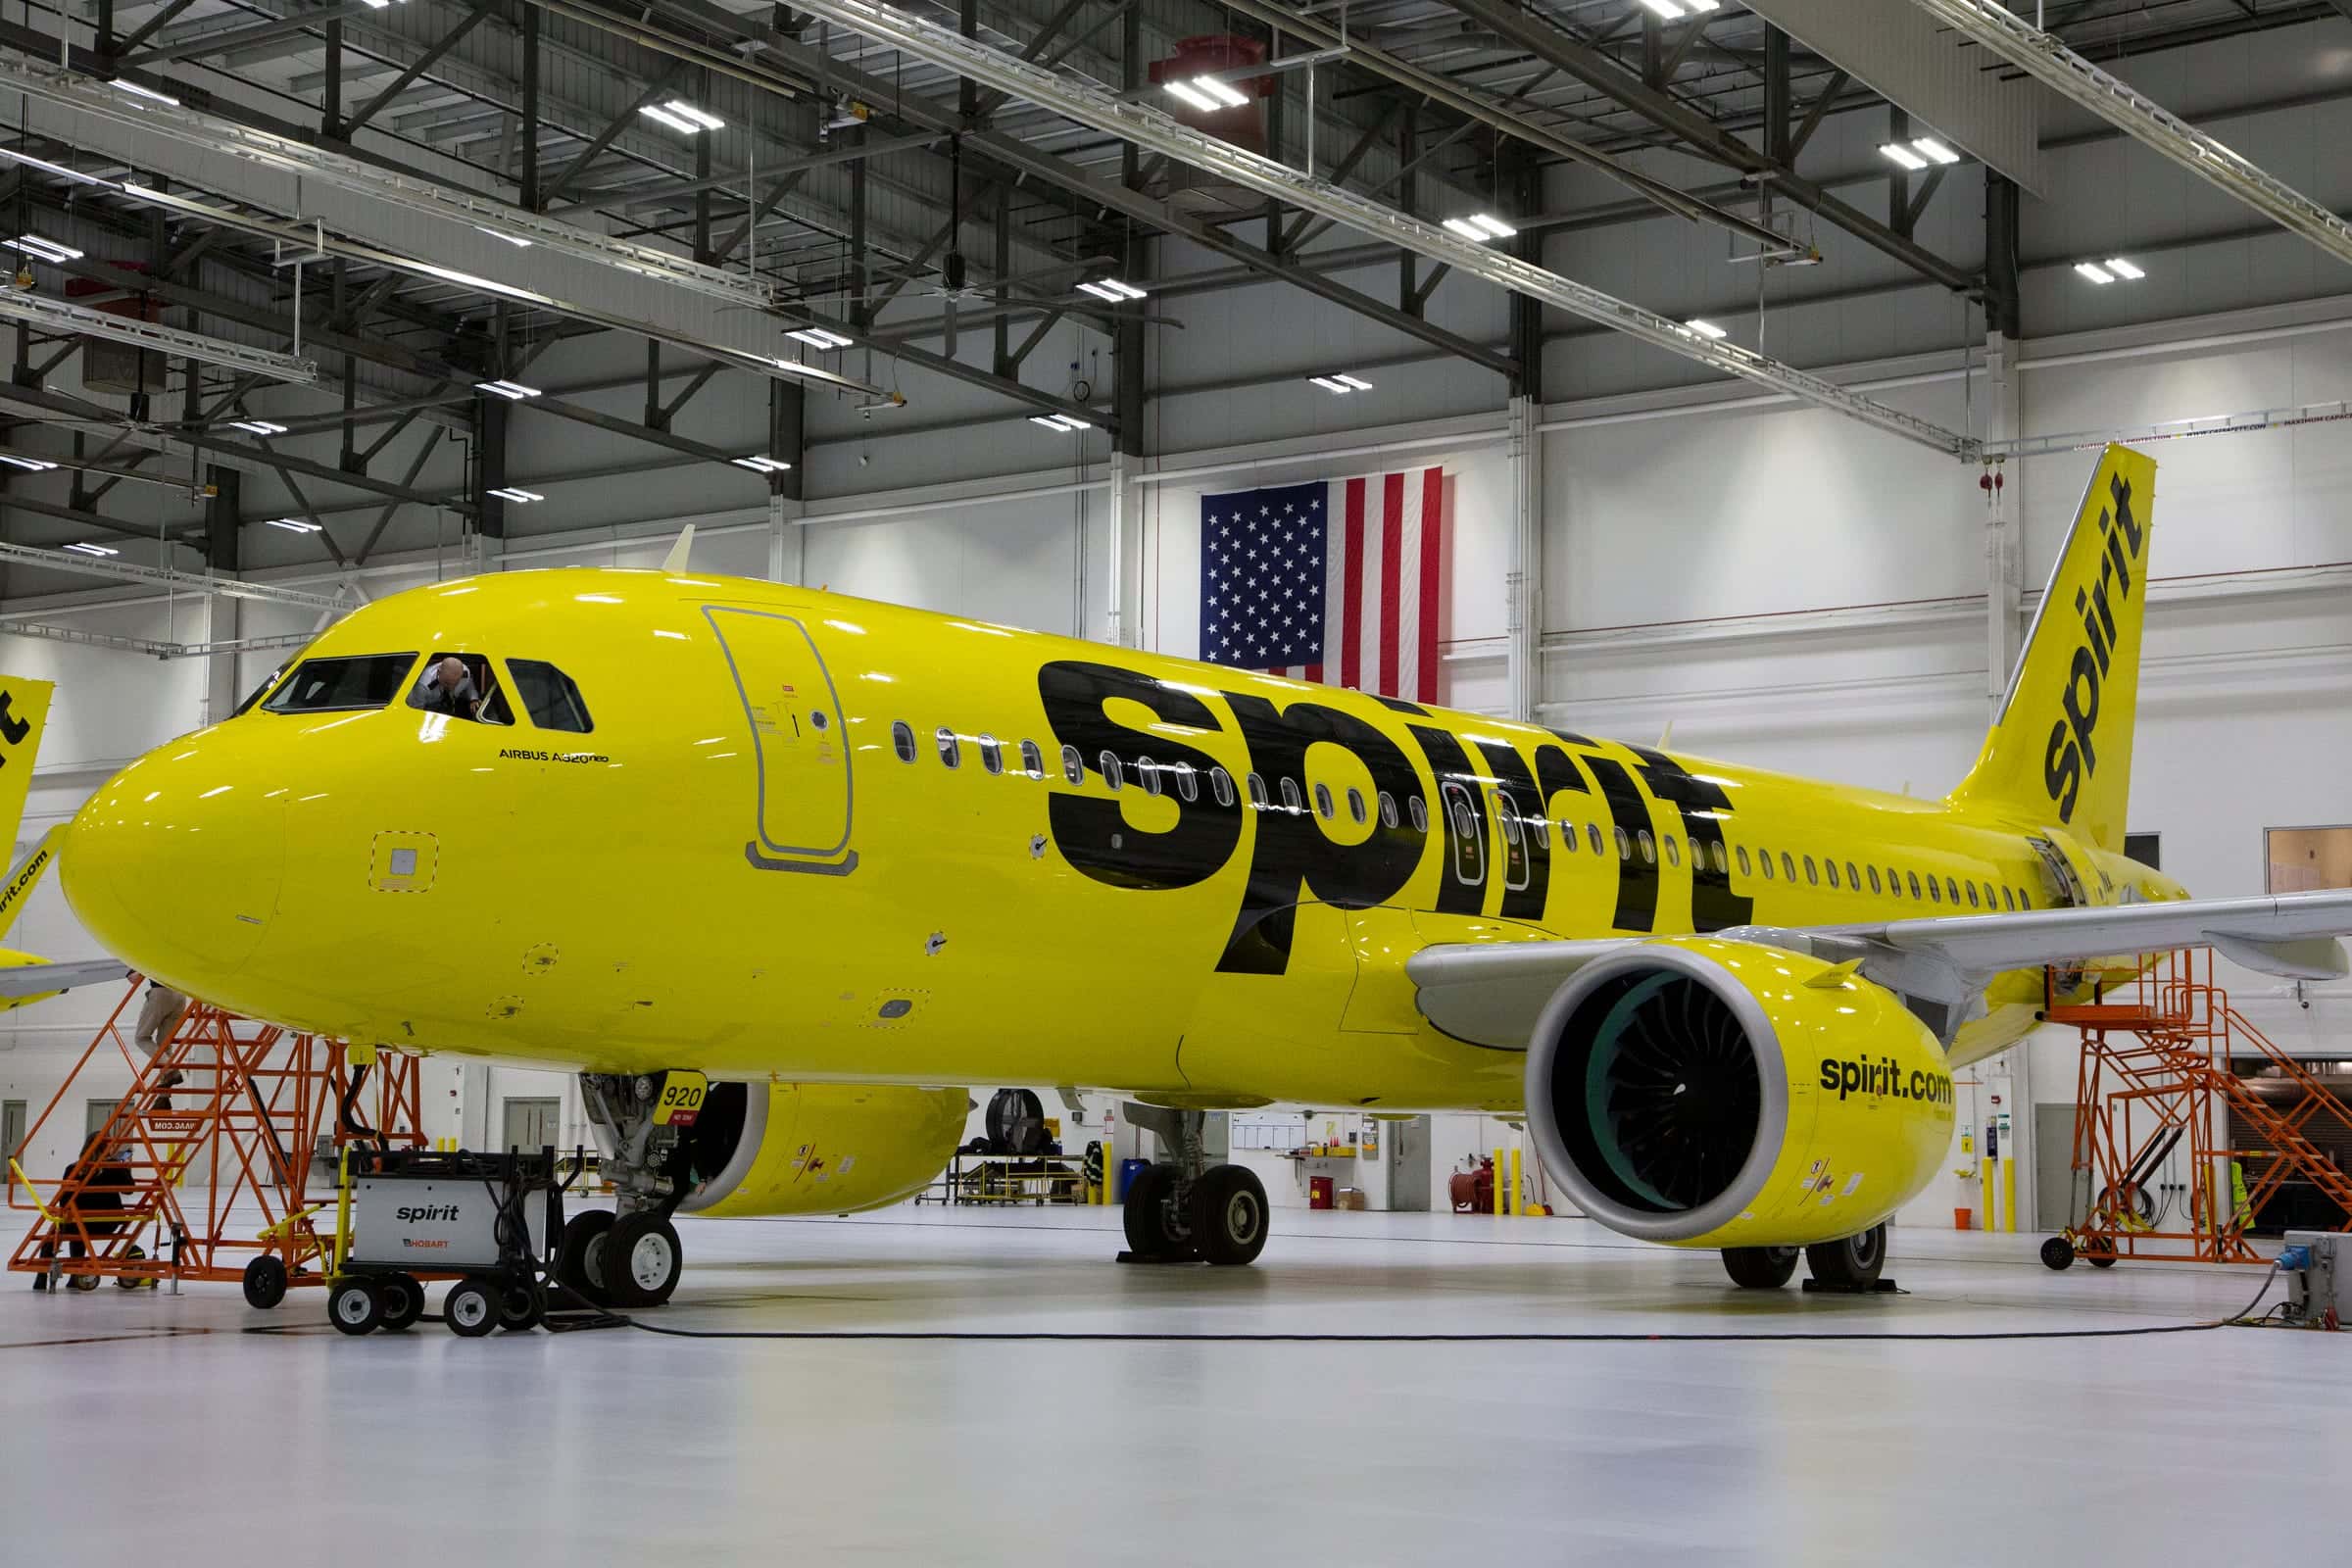 Spirit Airlines team showed off its new A320neo aircraft at their Metro Airport hanger Tuesday, Dec. 17, 2019. The A320neo includes lighter seats with a sleeker design created by UK-based Acro Aircraft Seating with thicker padding and ergonomically-designed lumbar support that offers more knee space and a one inch wider middle seat.